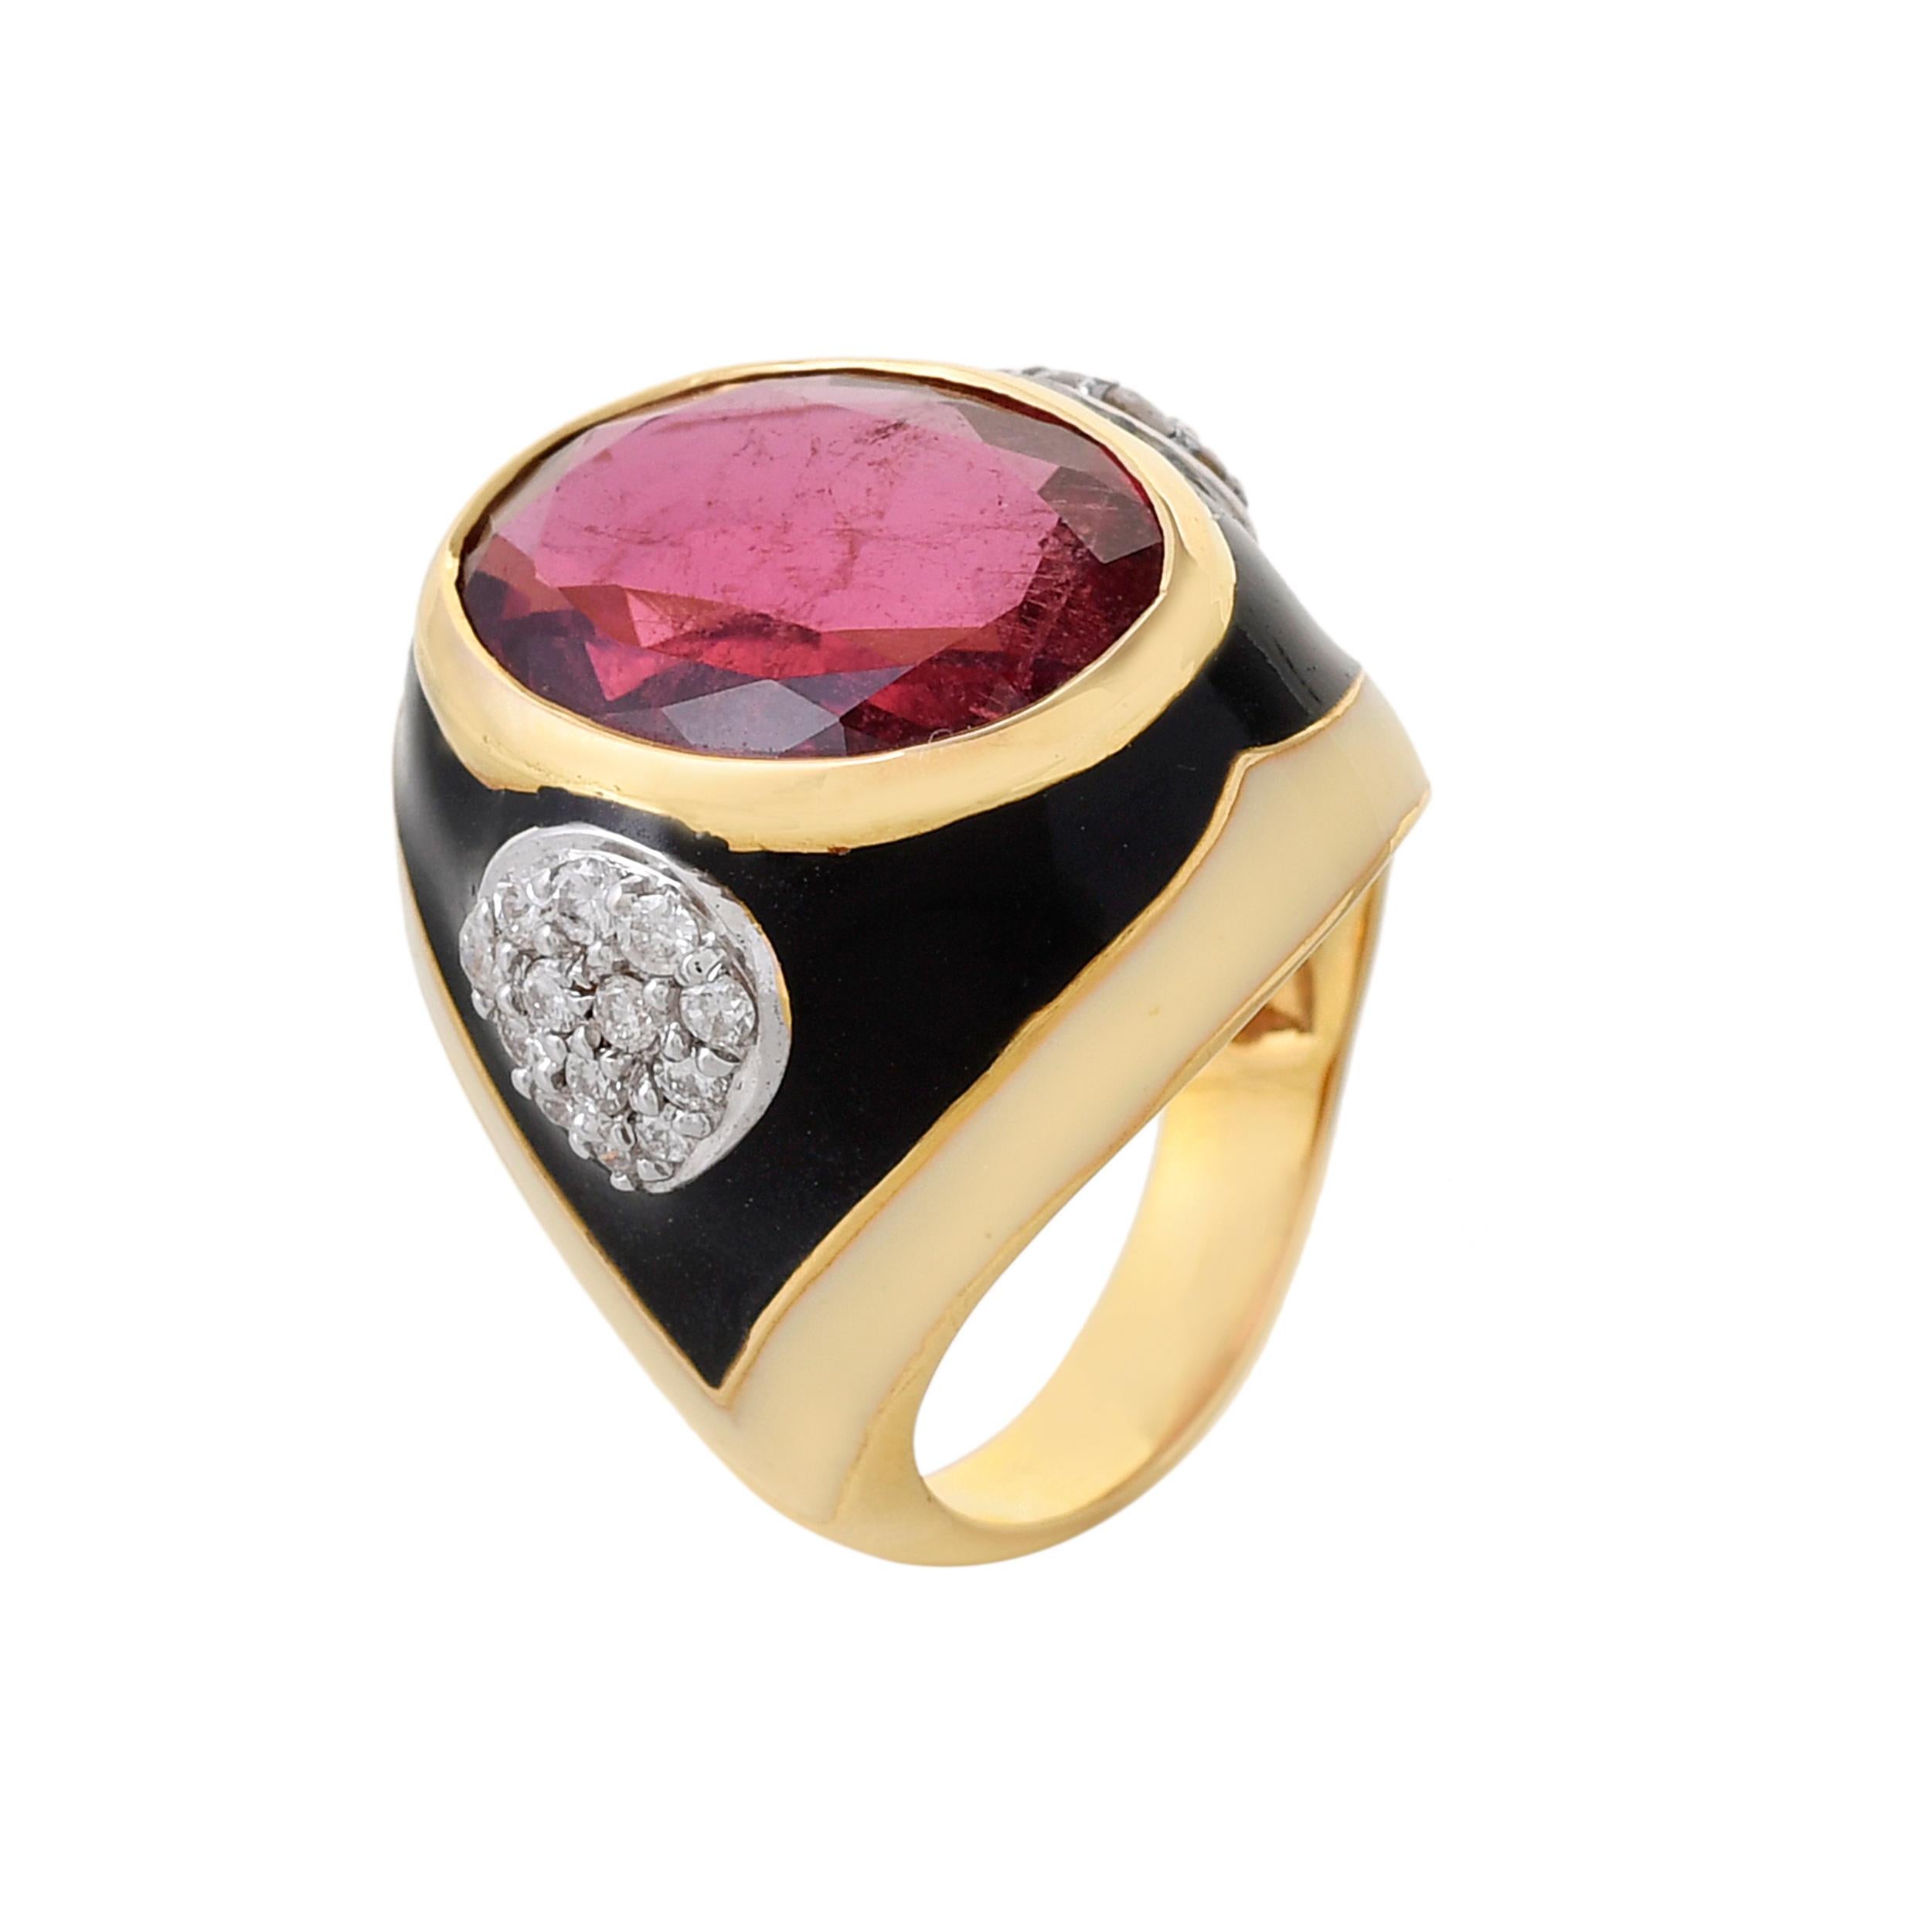 One-of-a-kind treasures from our limited-edition collection, this gorgeous oval rubellite weighing approximately 10.79 carats insert within a yellow gold bezel embraced by black enamel futher enhanced with pave set diamonds with a total diamond